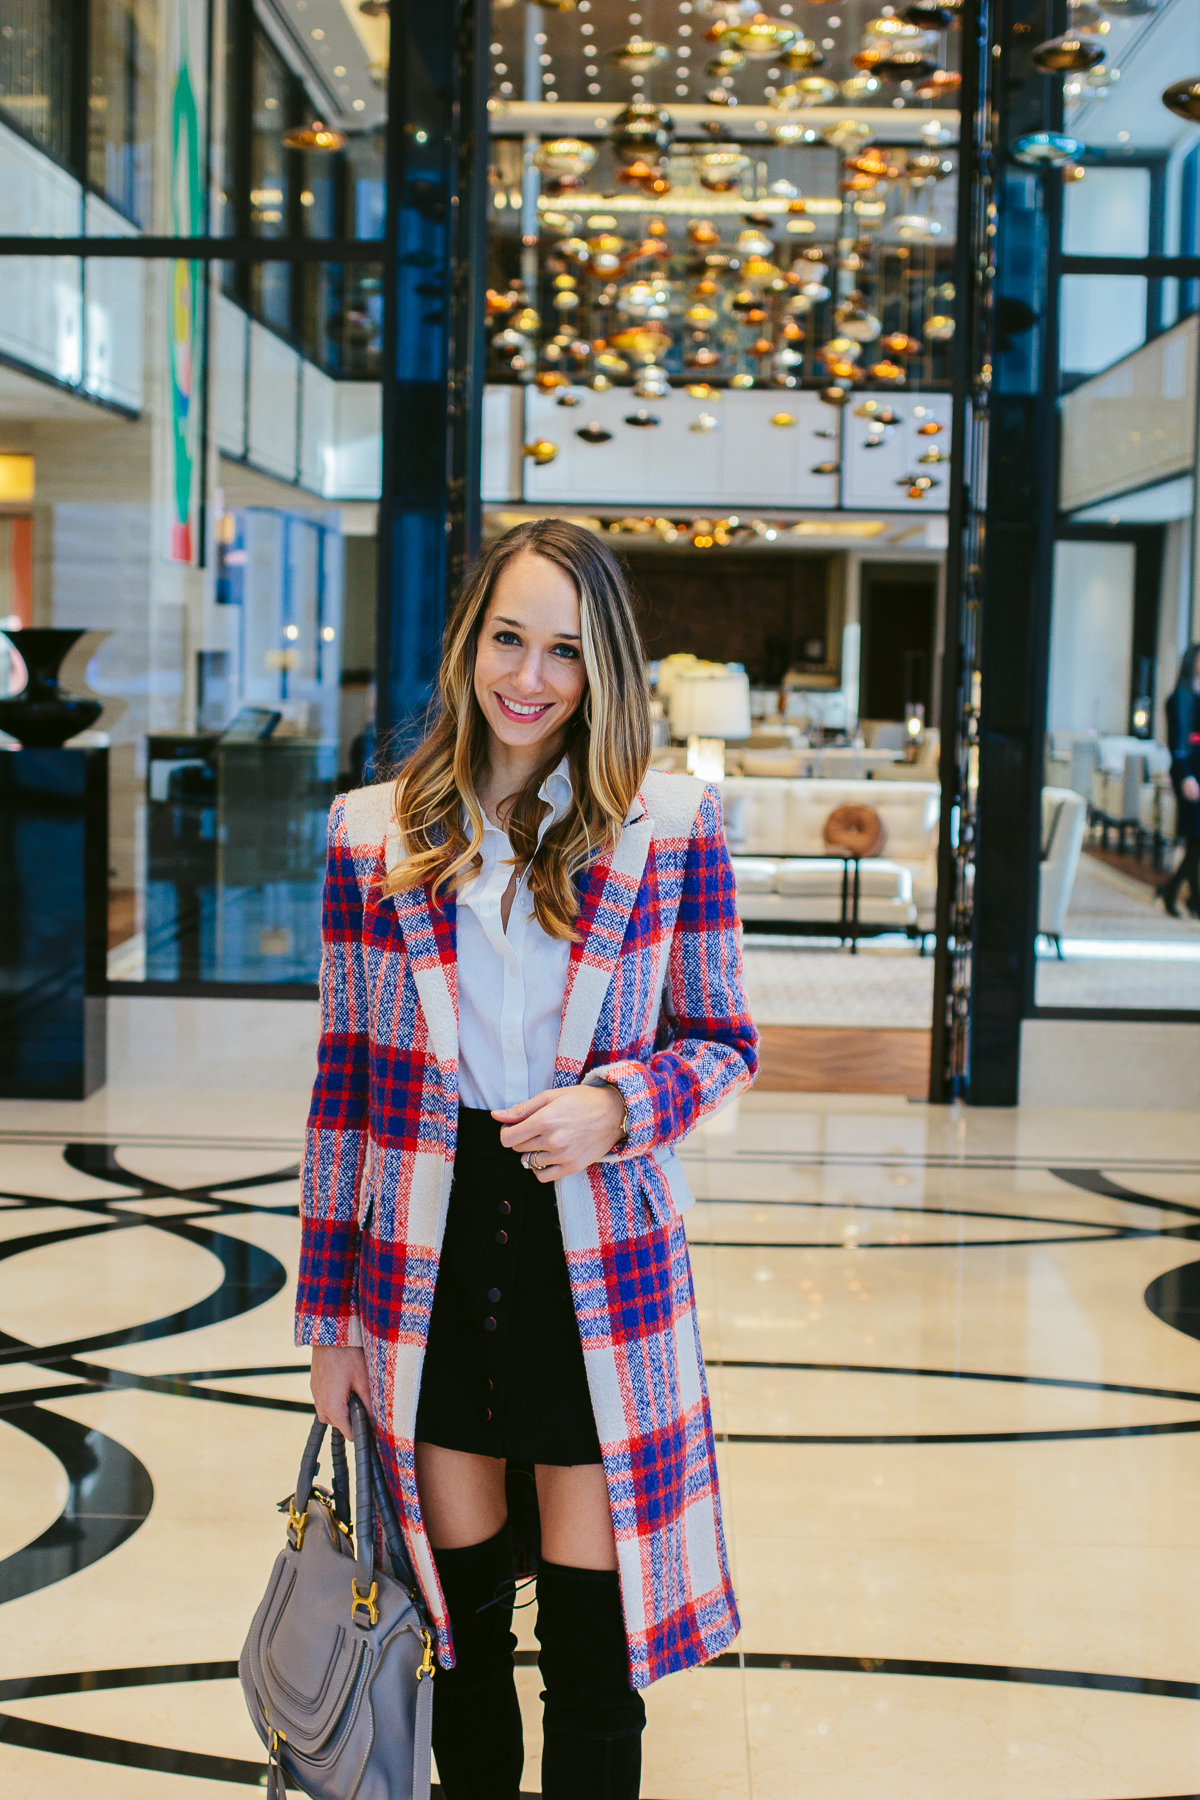 plaid coat, buttoned skirt, knee high boots, winter outfit — via @TheFoxandShe